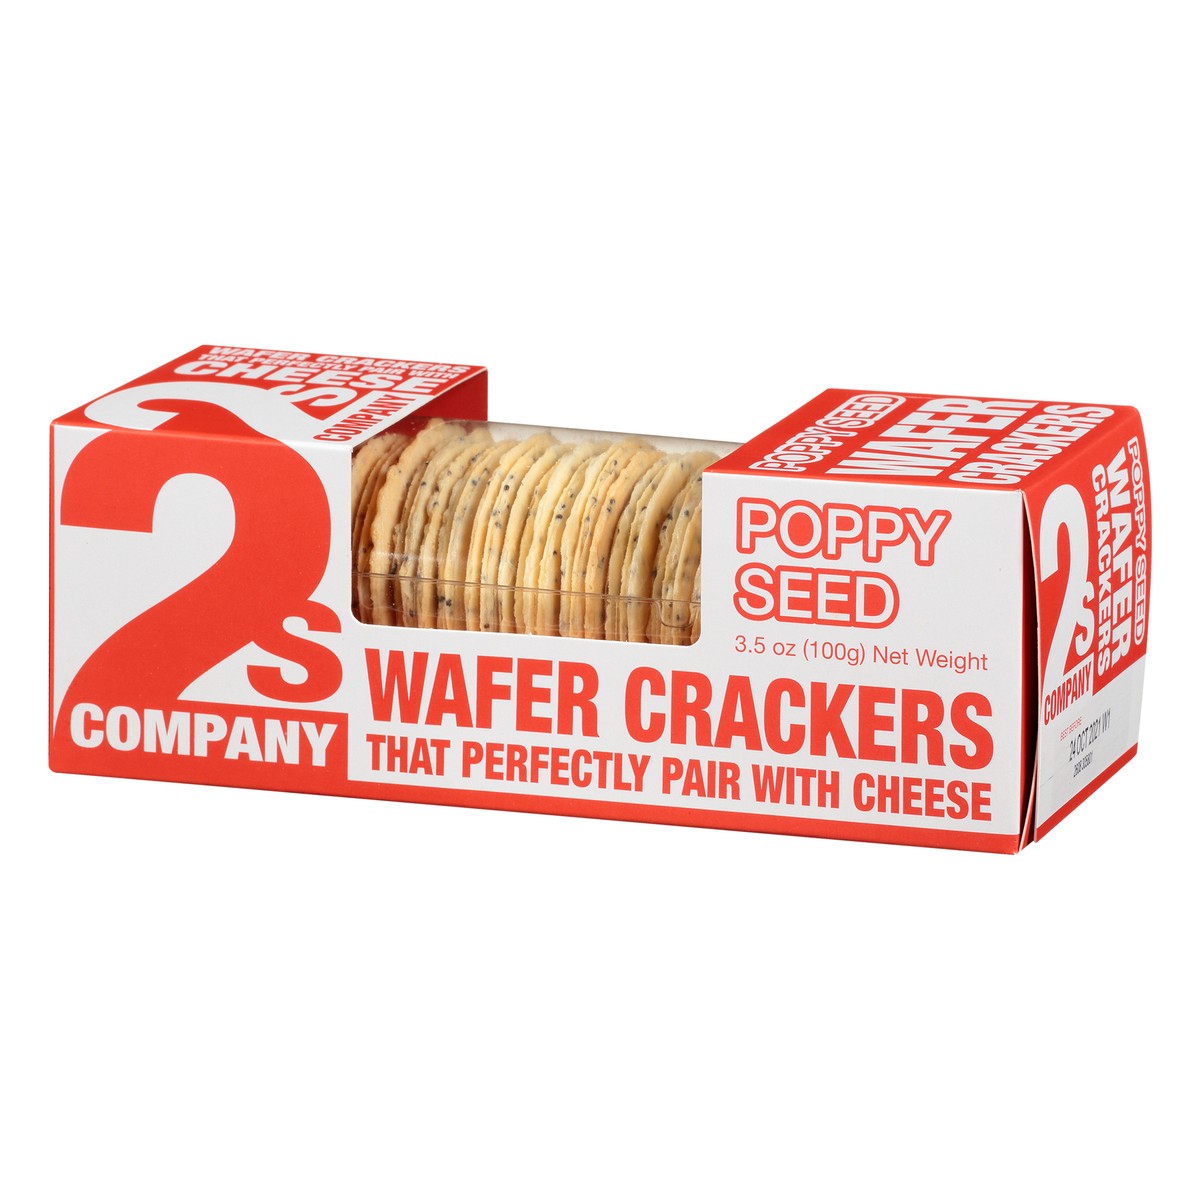 slide 3 of 10, 2S Company Wafer Poppy Seed Crackers, 3.5 oz